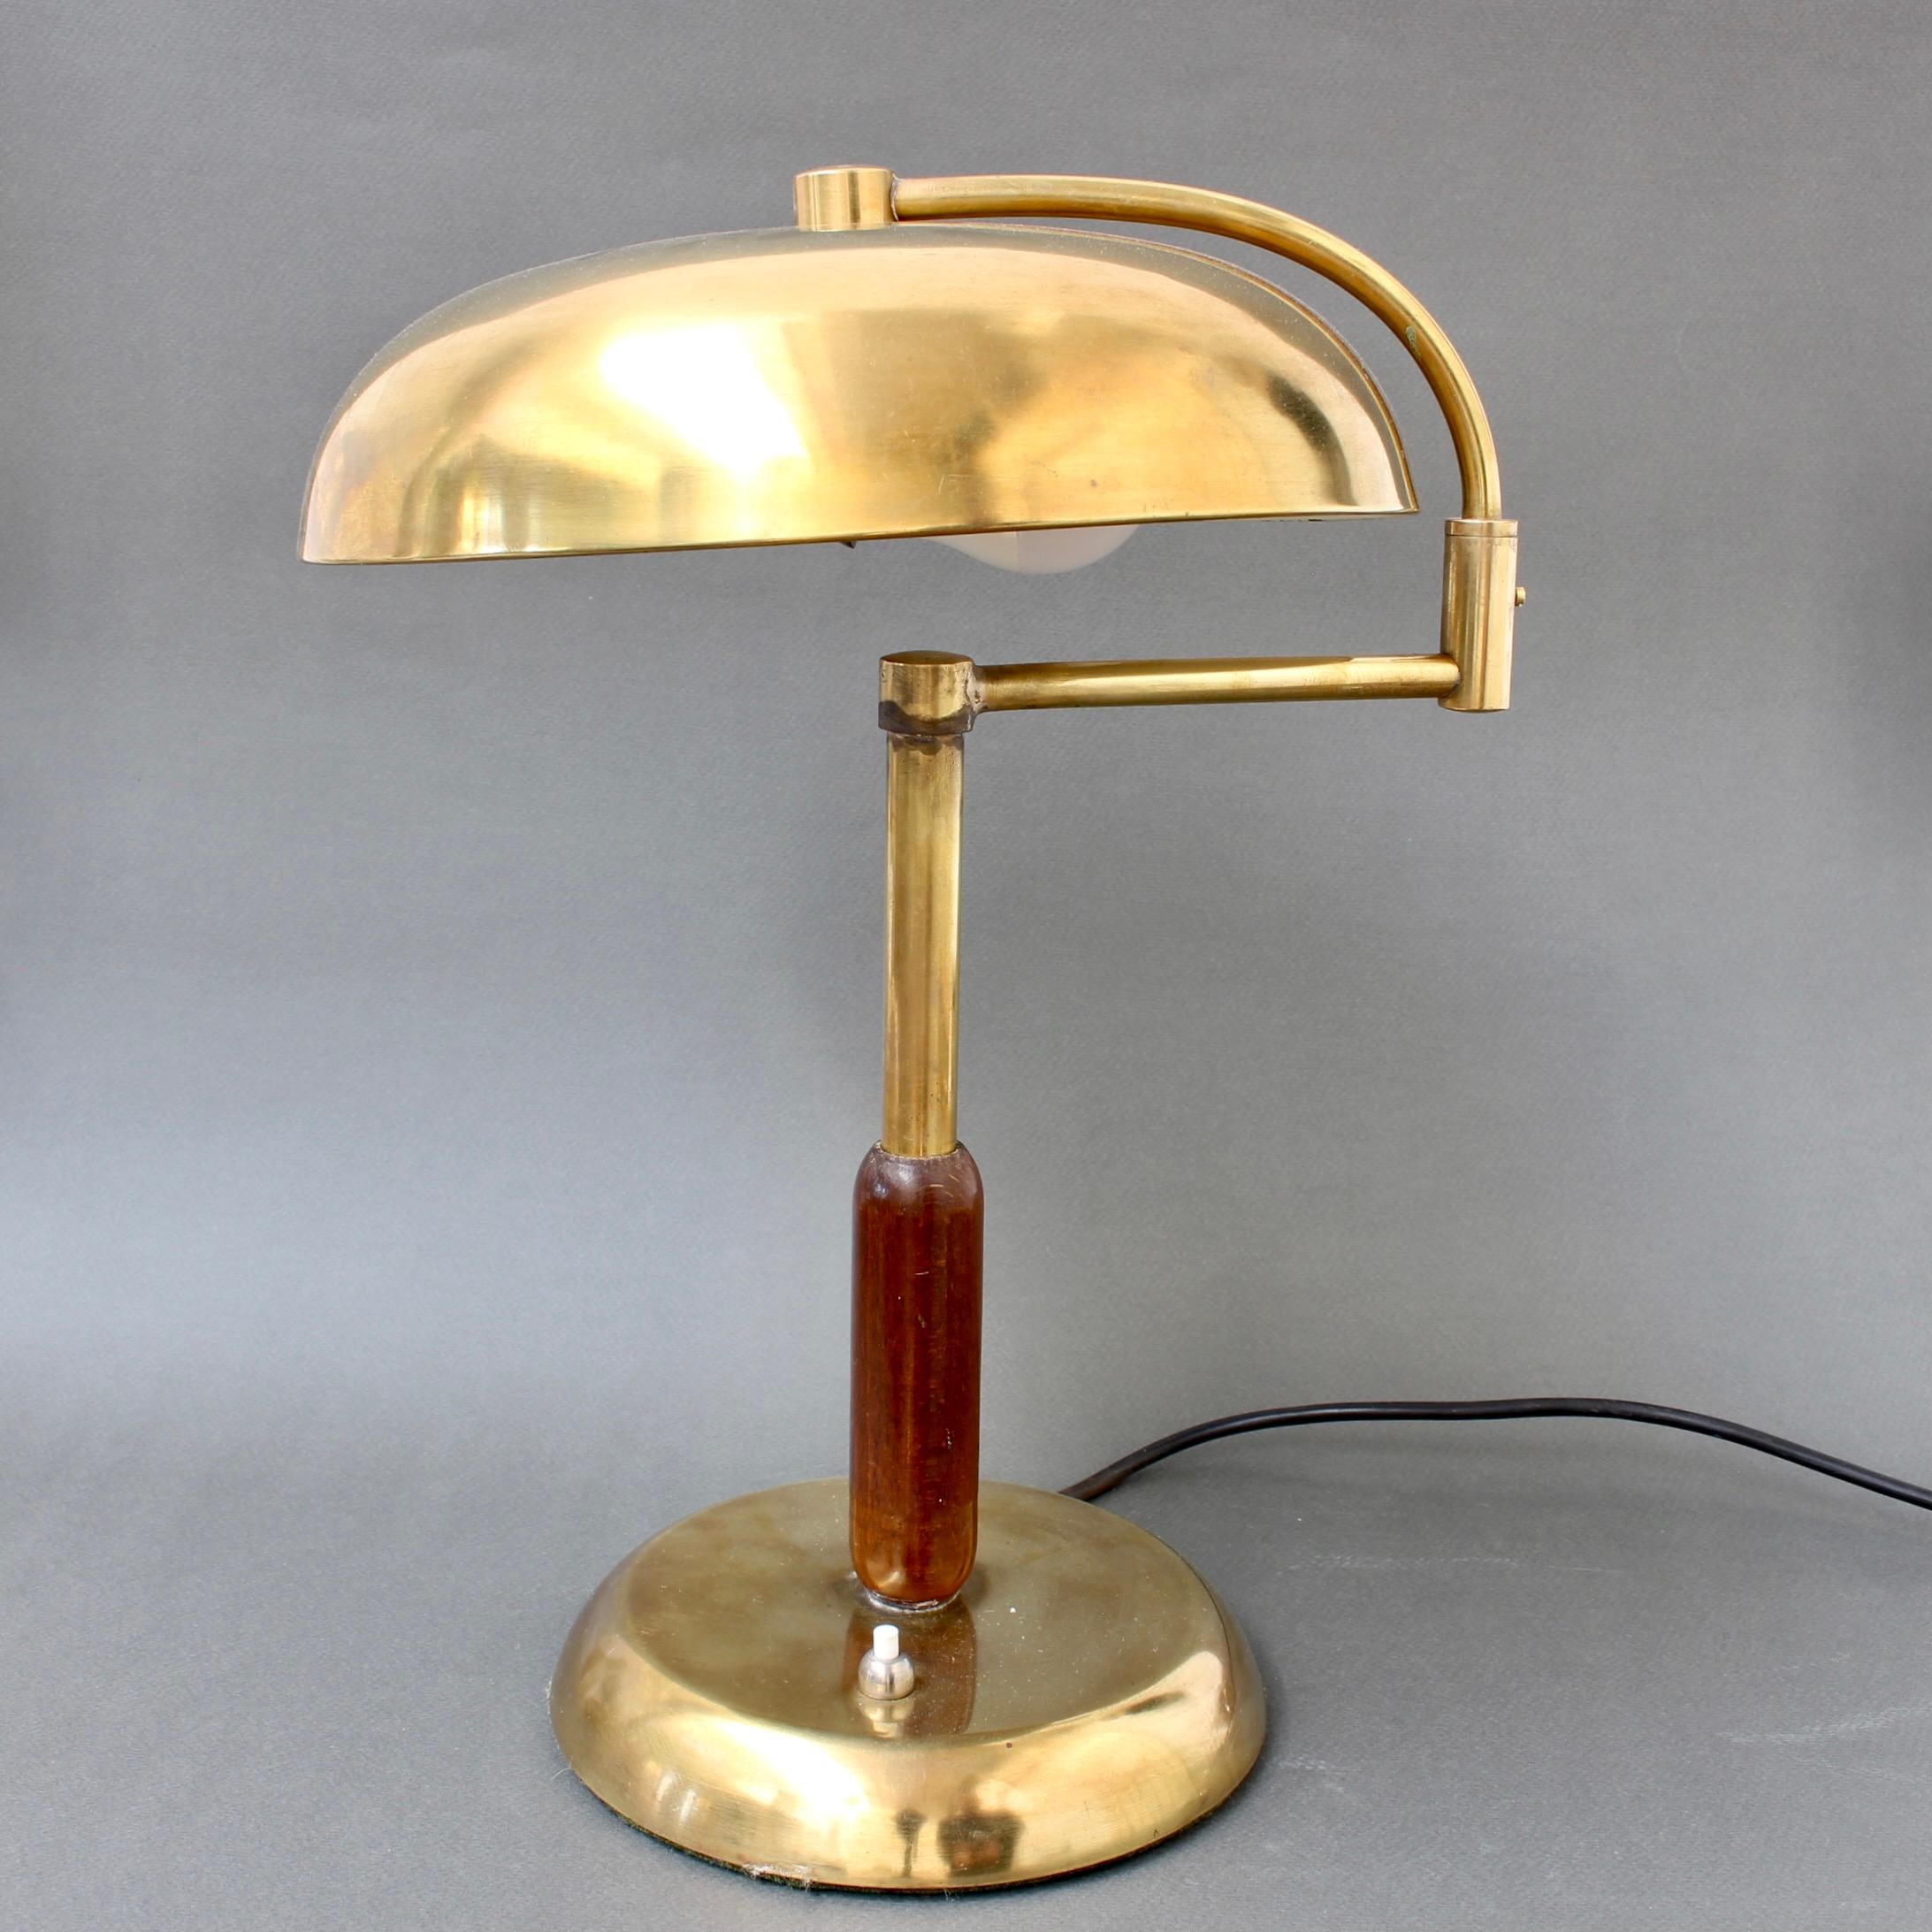 Italian vintage brass table lamp with swivel arm (circa 1950s). A timeless desk lamp with delightful vintage detail and rounded shade which swivels upon the weighty base. The brass features a characterful aged brass patina throughout adding warmth